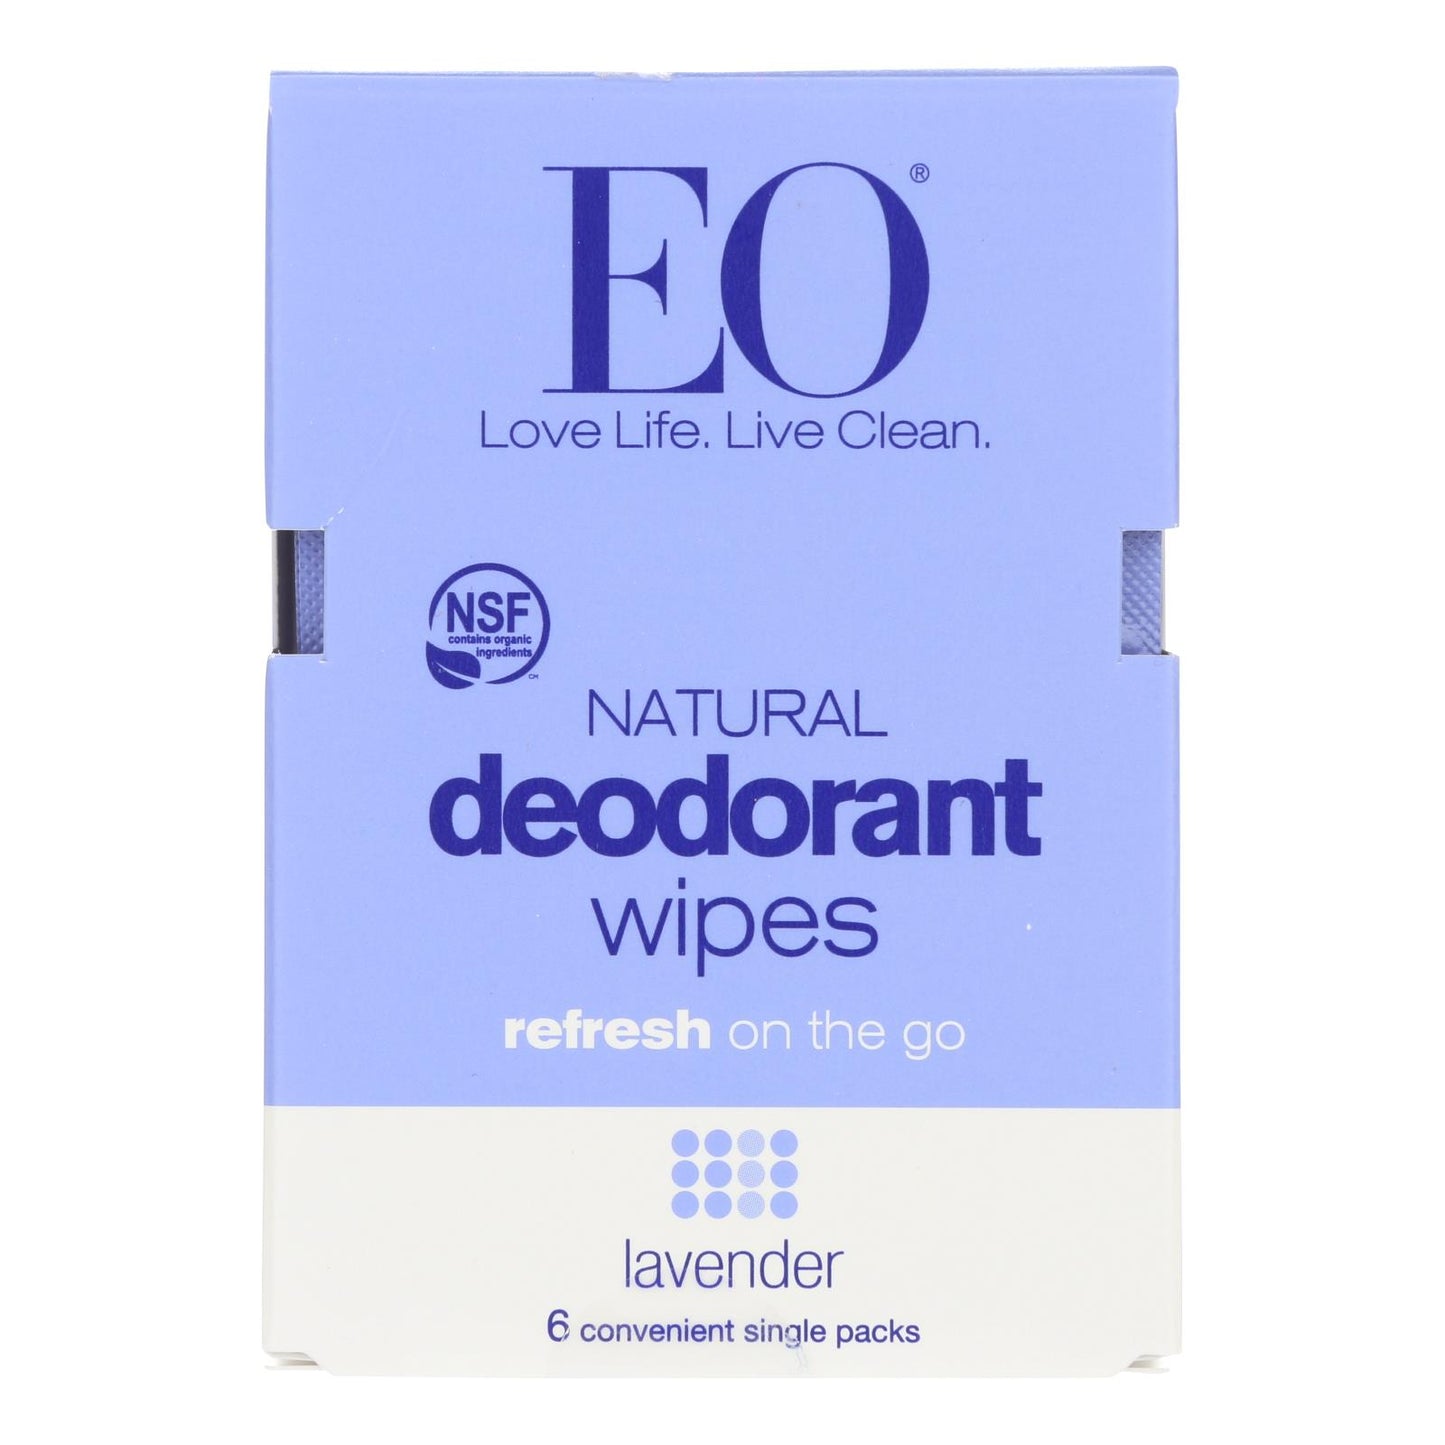 Eo Products - Deodorant Wipes - Lavender - Case Of 12 - 6 Count